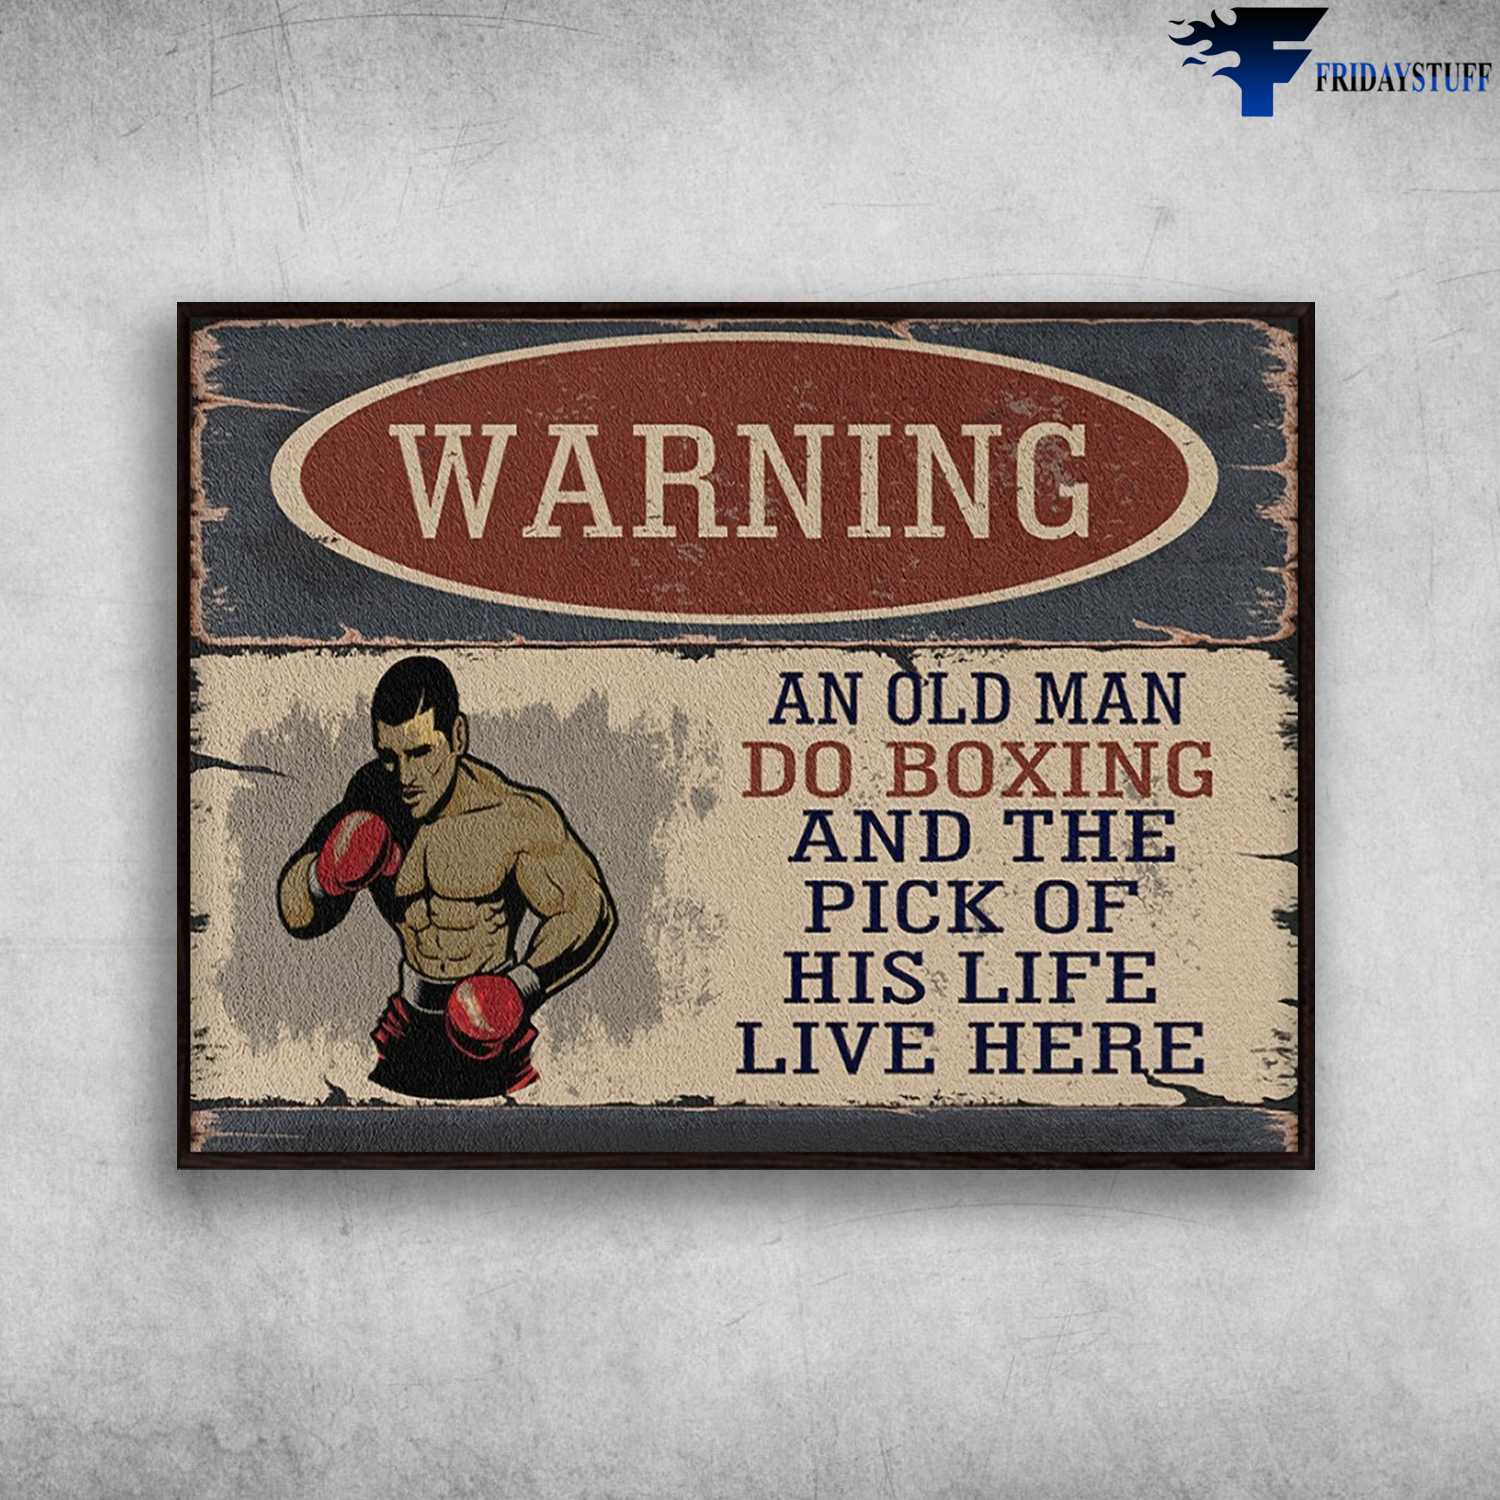 Boxing Man, Boxing Poster - Warning An Old Man, Do Boxing, And The Pick Of His Life, Lie Here